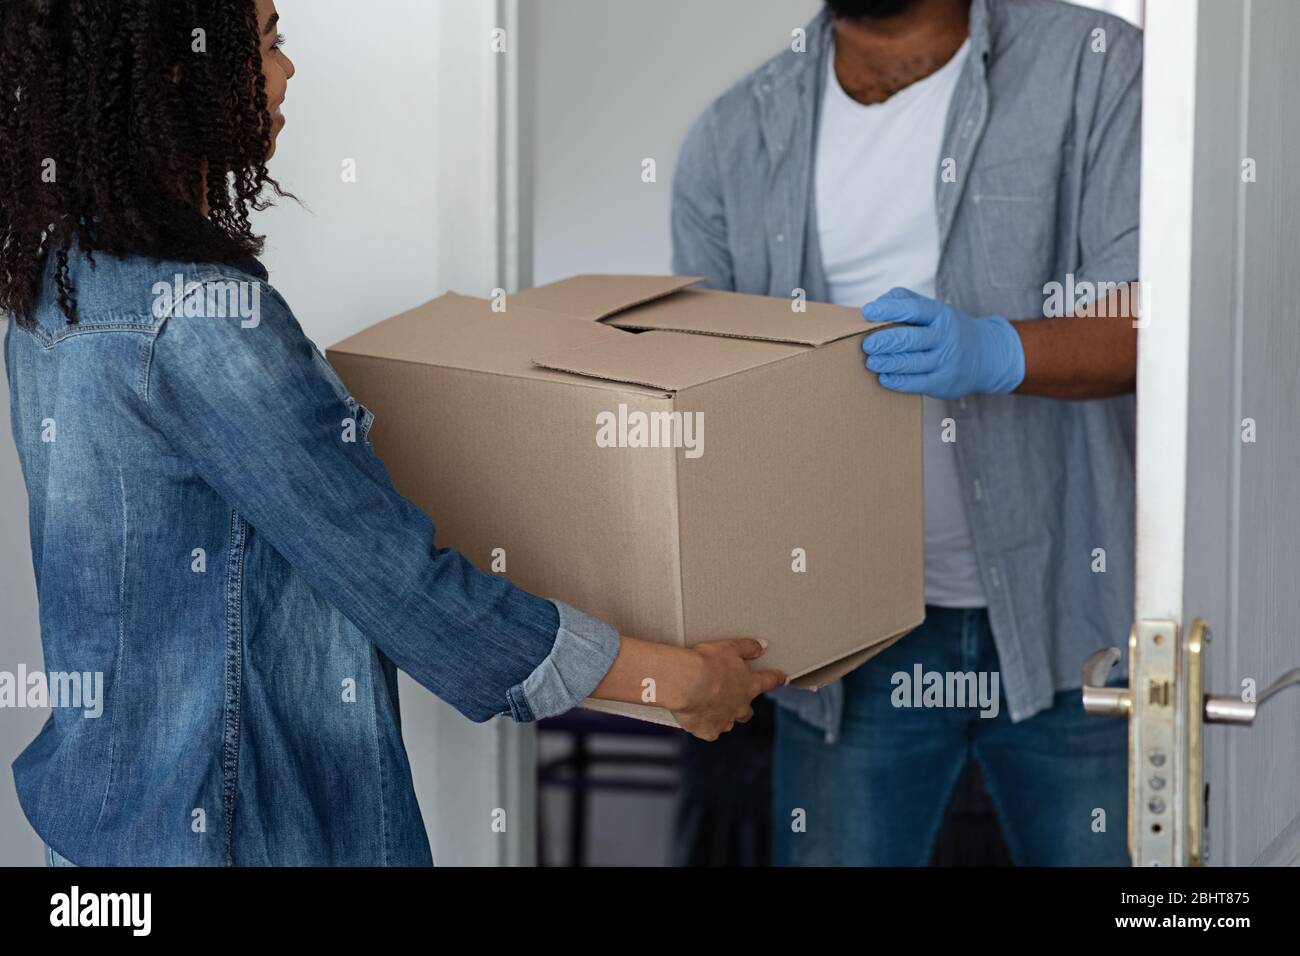 Unrecognizable Black Delivery Man Delivering Package To Woman Homeowner Stock Photo